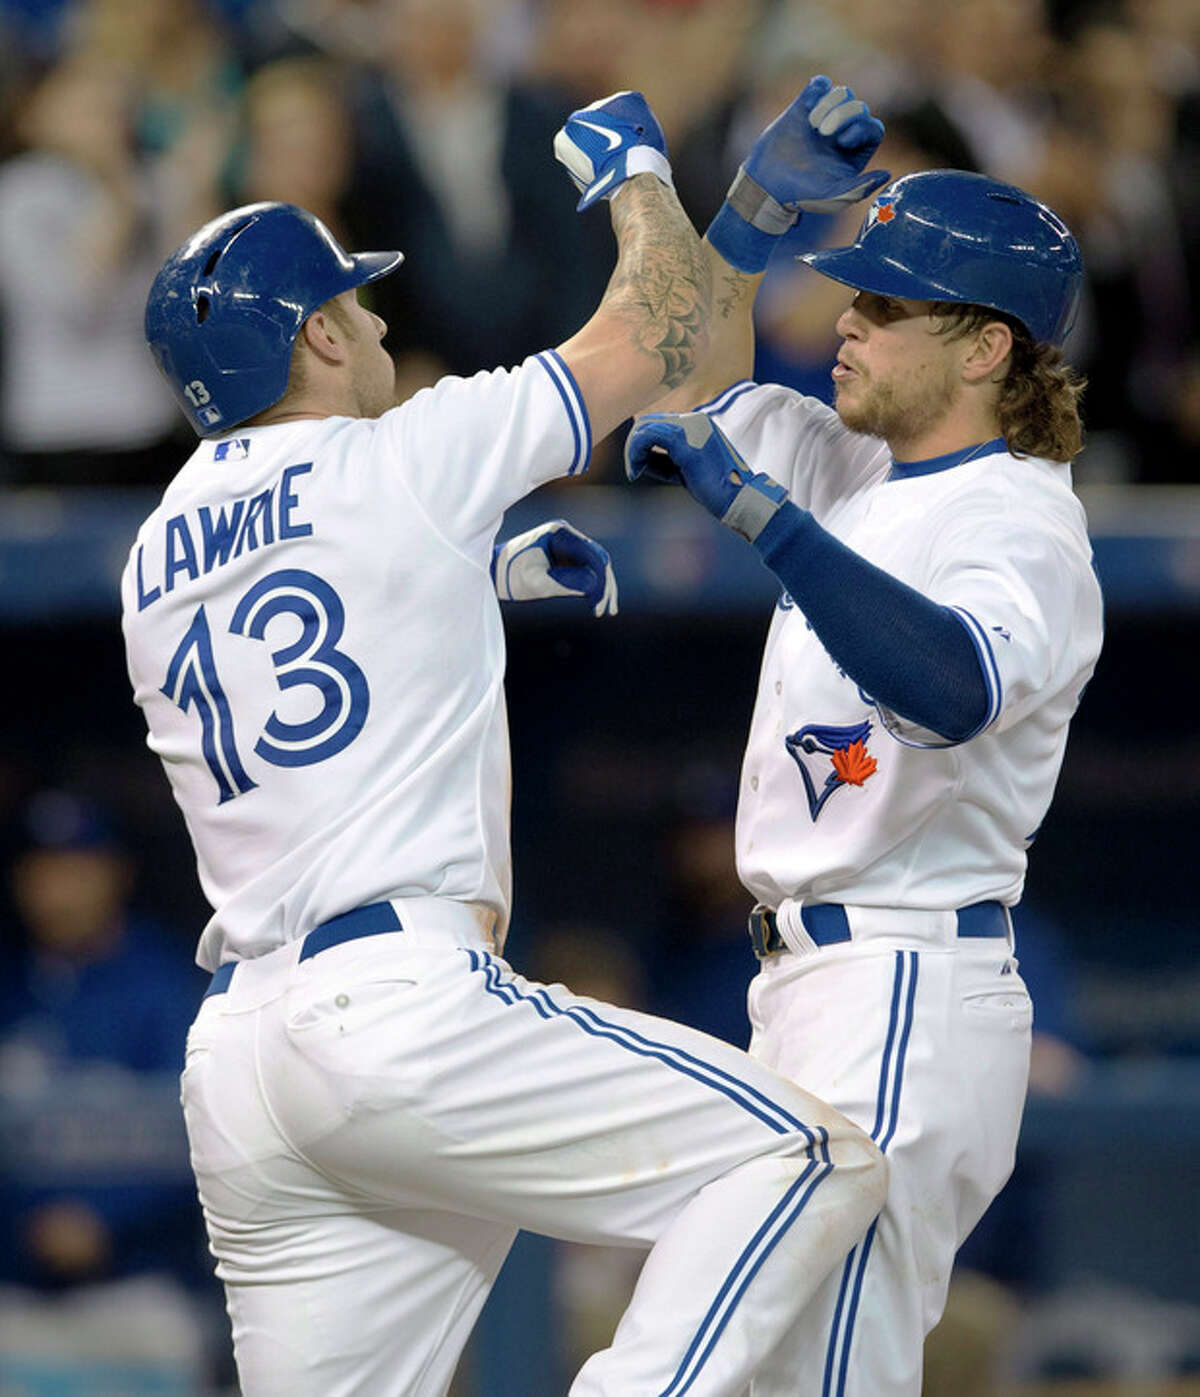 Toronto Blue Jays' Colby Rasmus, right, celebrates his two run home run against the New York Yankees with teammate Brett Lawrie during the fourth inning of MLB American League baseball action in Toronto Wednesday, Sept. 18, 2013. (AP Photo/The Canadian Press, Mark Blinch)